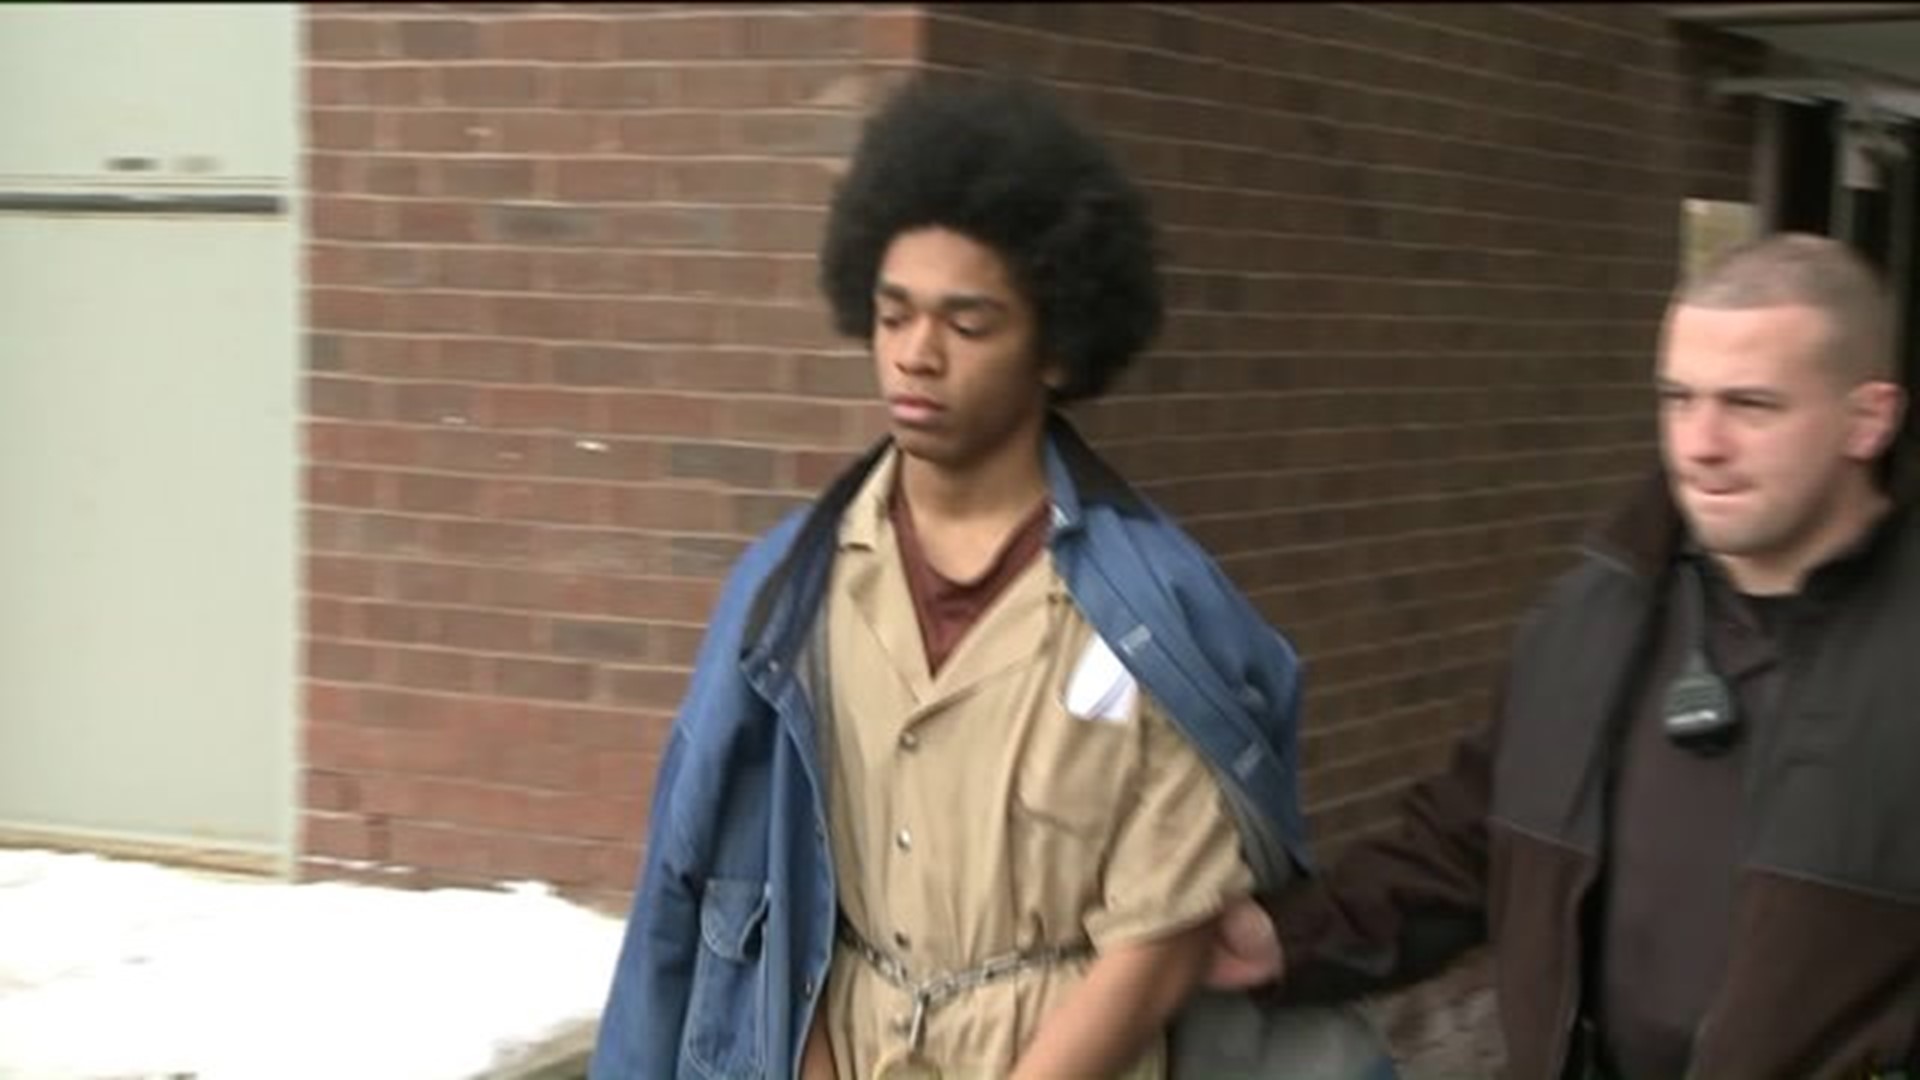 Teen Admits to Attack on Elderly Woman in Wayne County